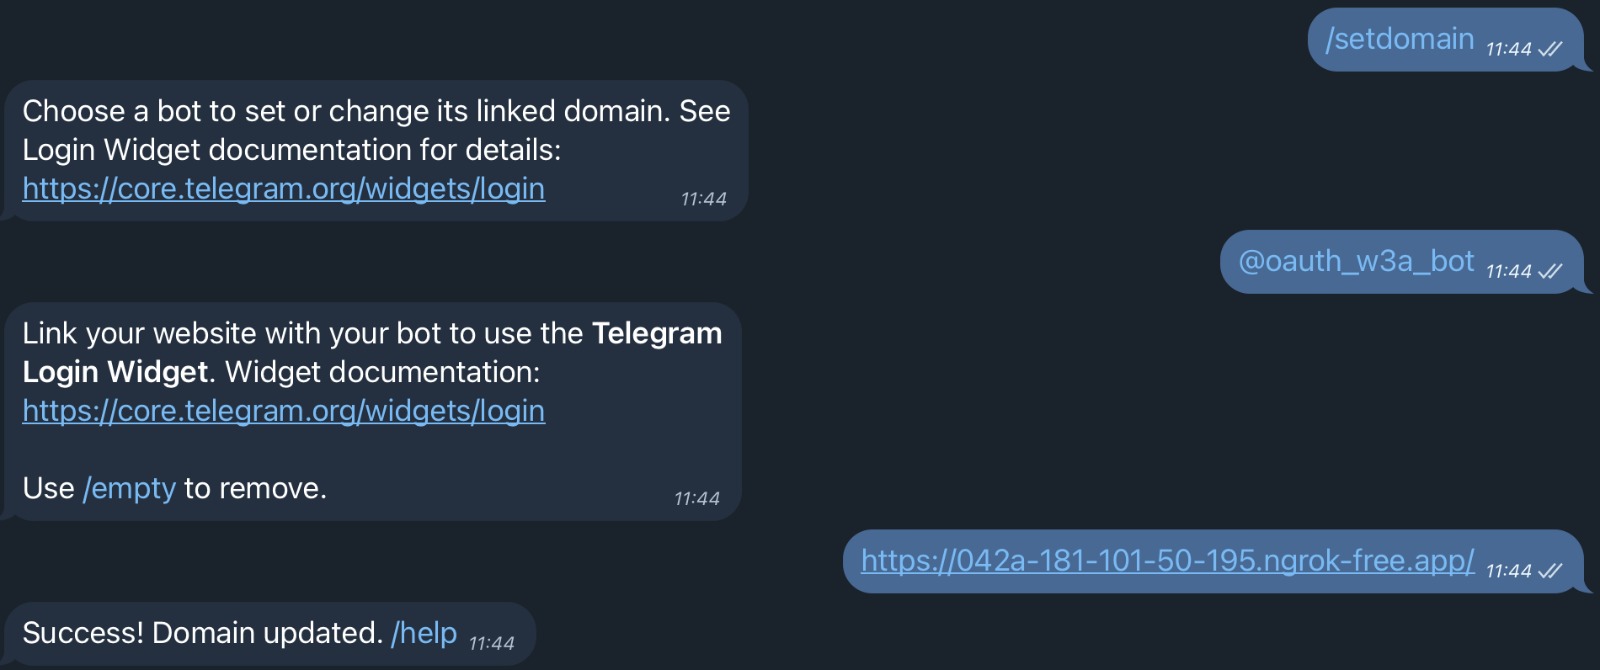 Set the domain in the bot